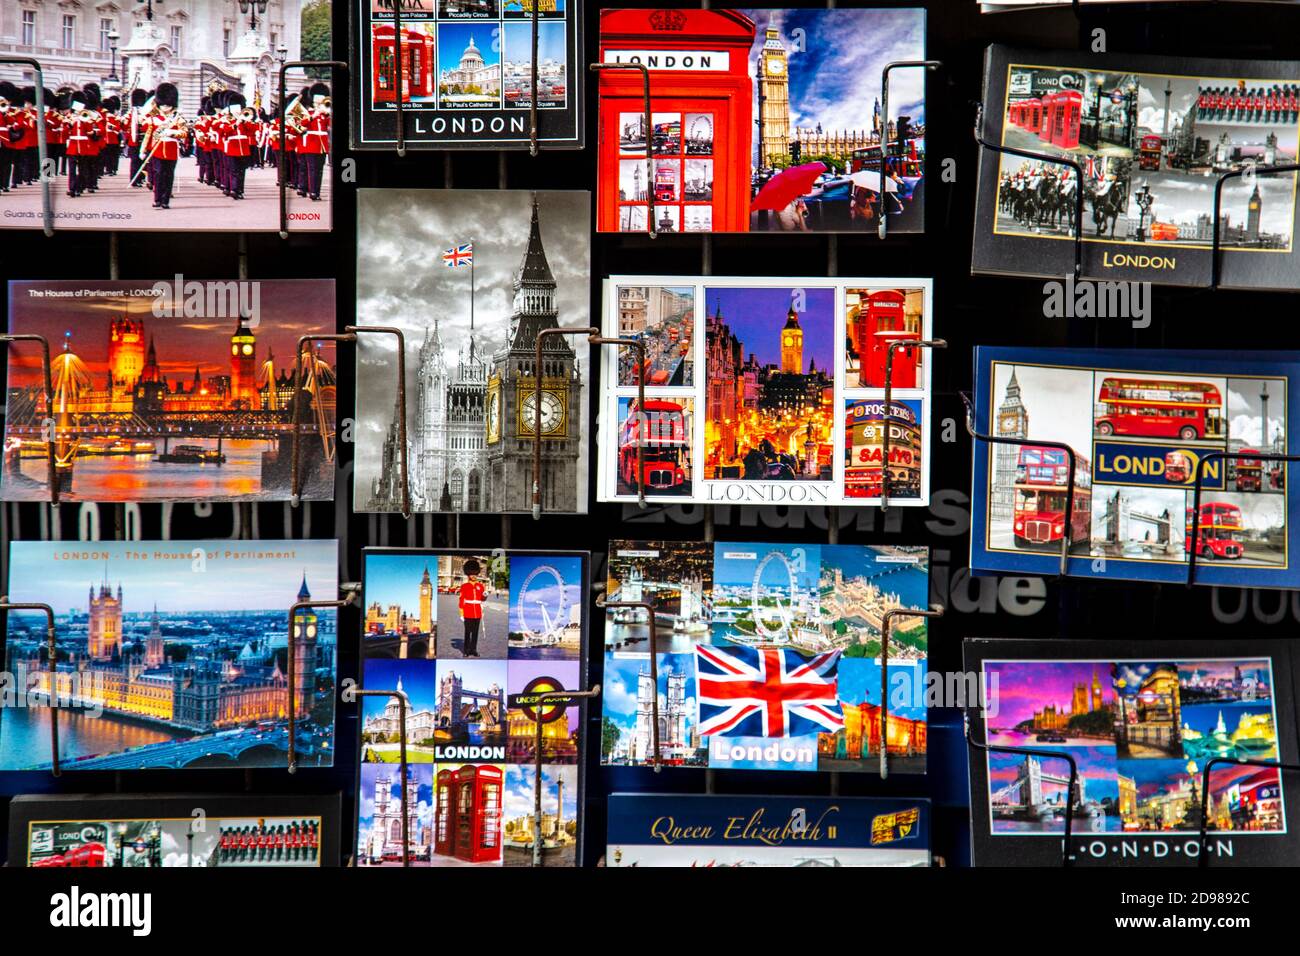 London postcards displayed on racks in front of a souvenir shop, London, UK Stock Photo